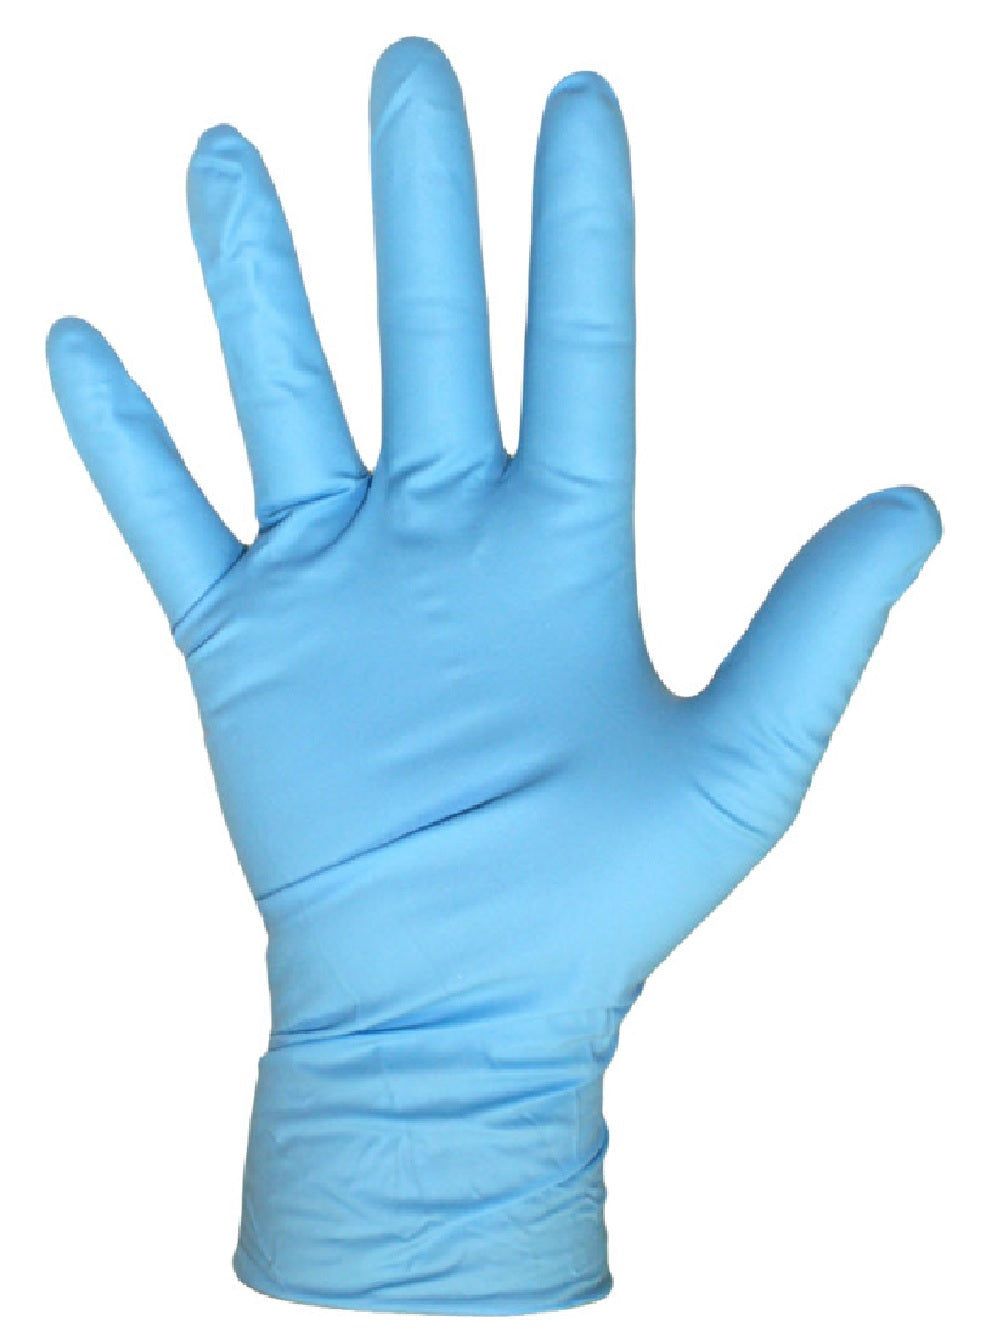 Boss 1UH0001S Disposable Nitrile Glove, Blue, Small